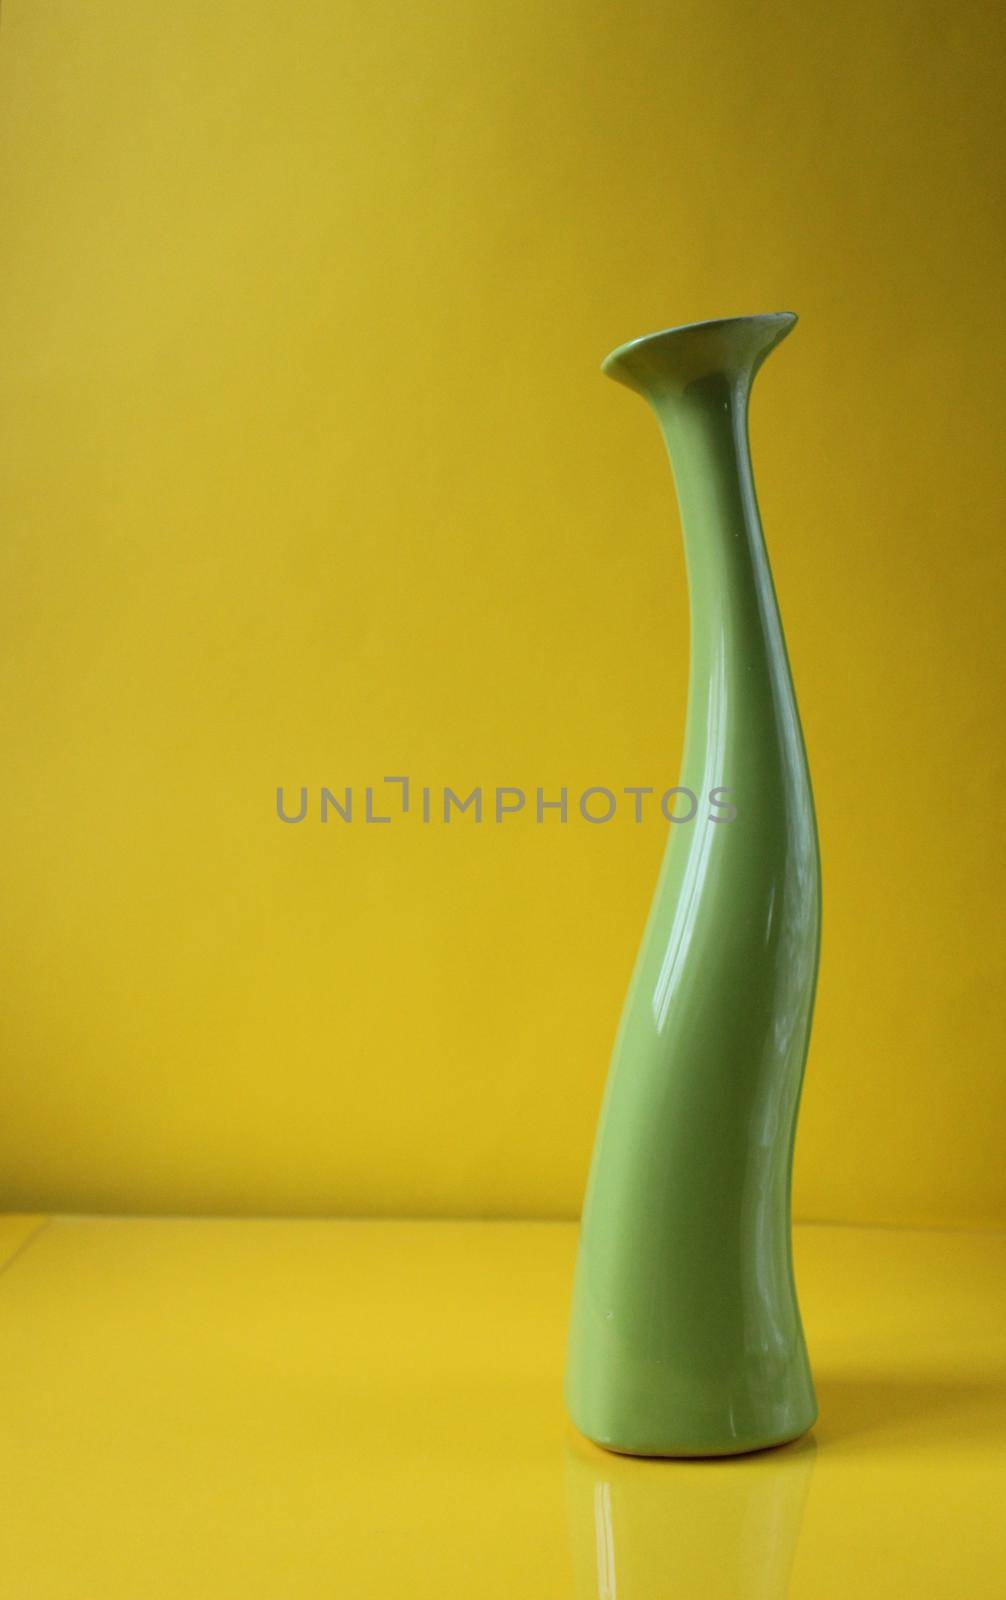 Green asymetric vase on trend color Illuminatiited yellow background with copyspace place for text.